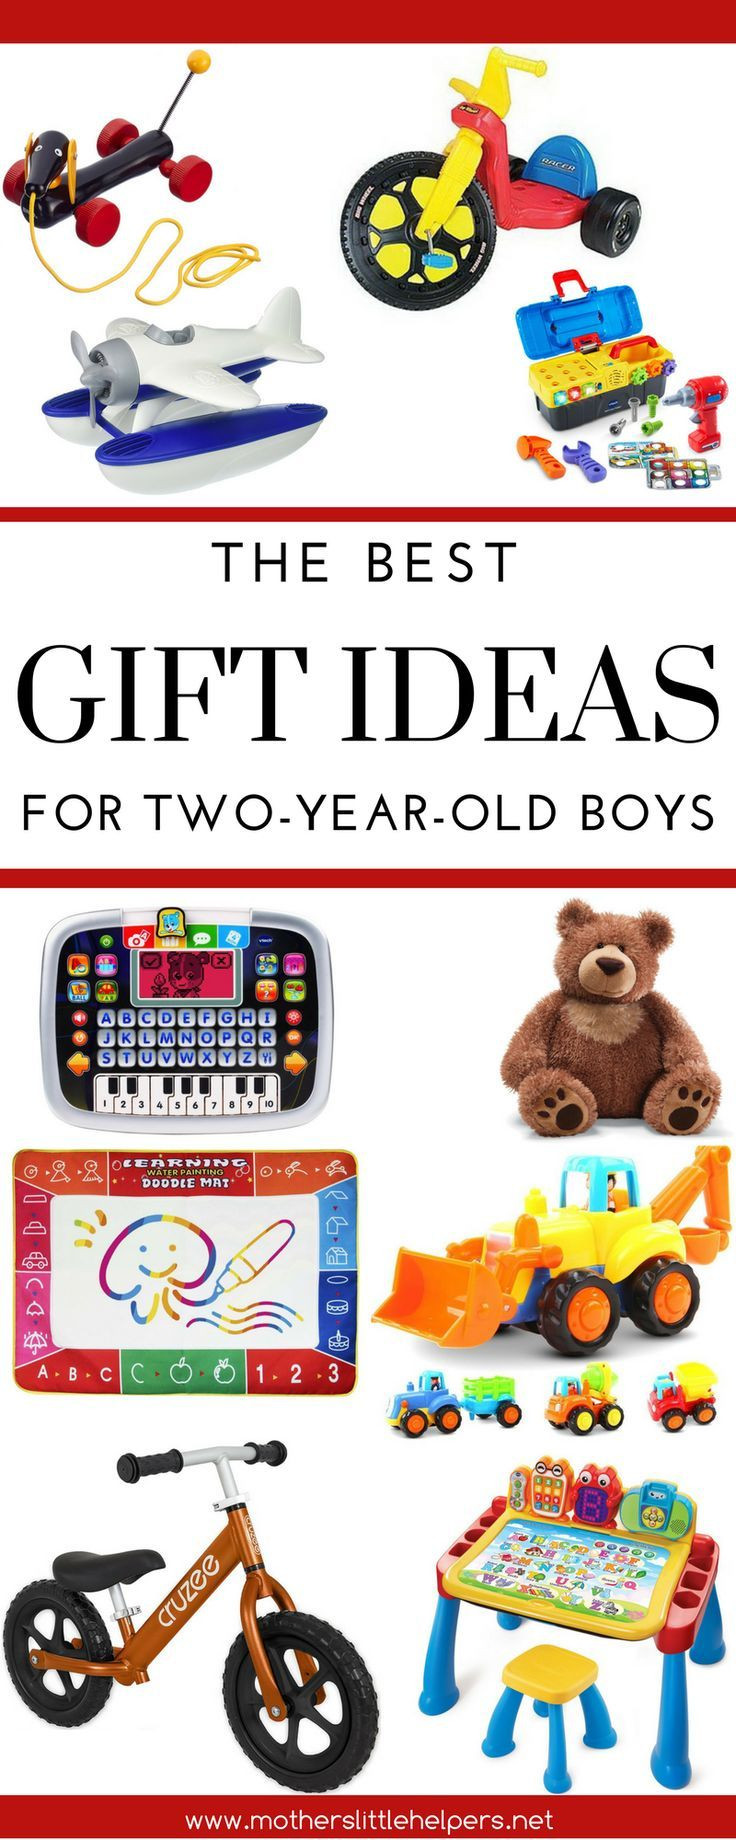 Valentine Gift Ideas For 2 Year Old Boy
 presents for toddler boys Gift Ideas for Two Year Old